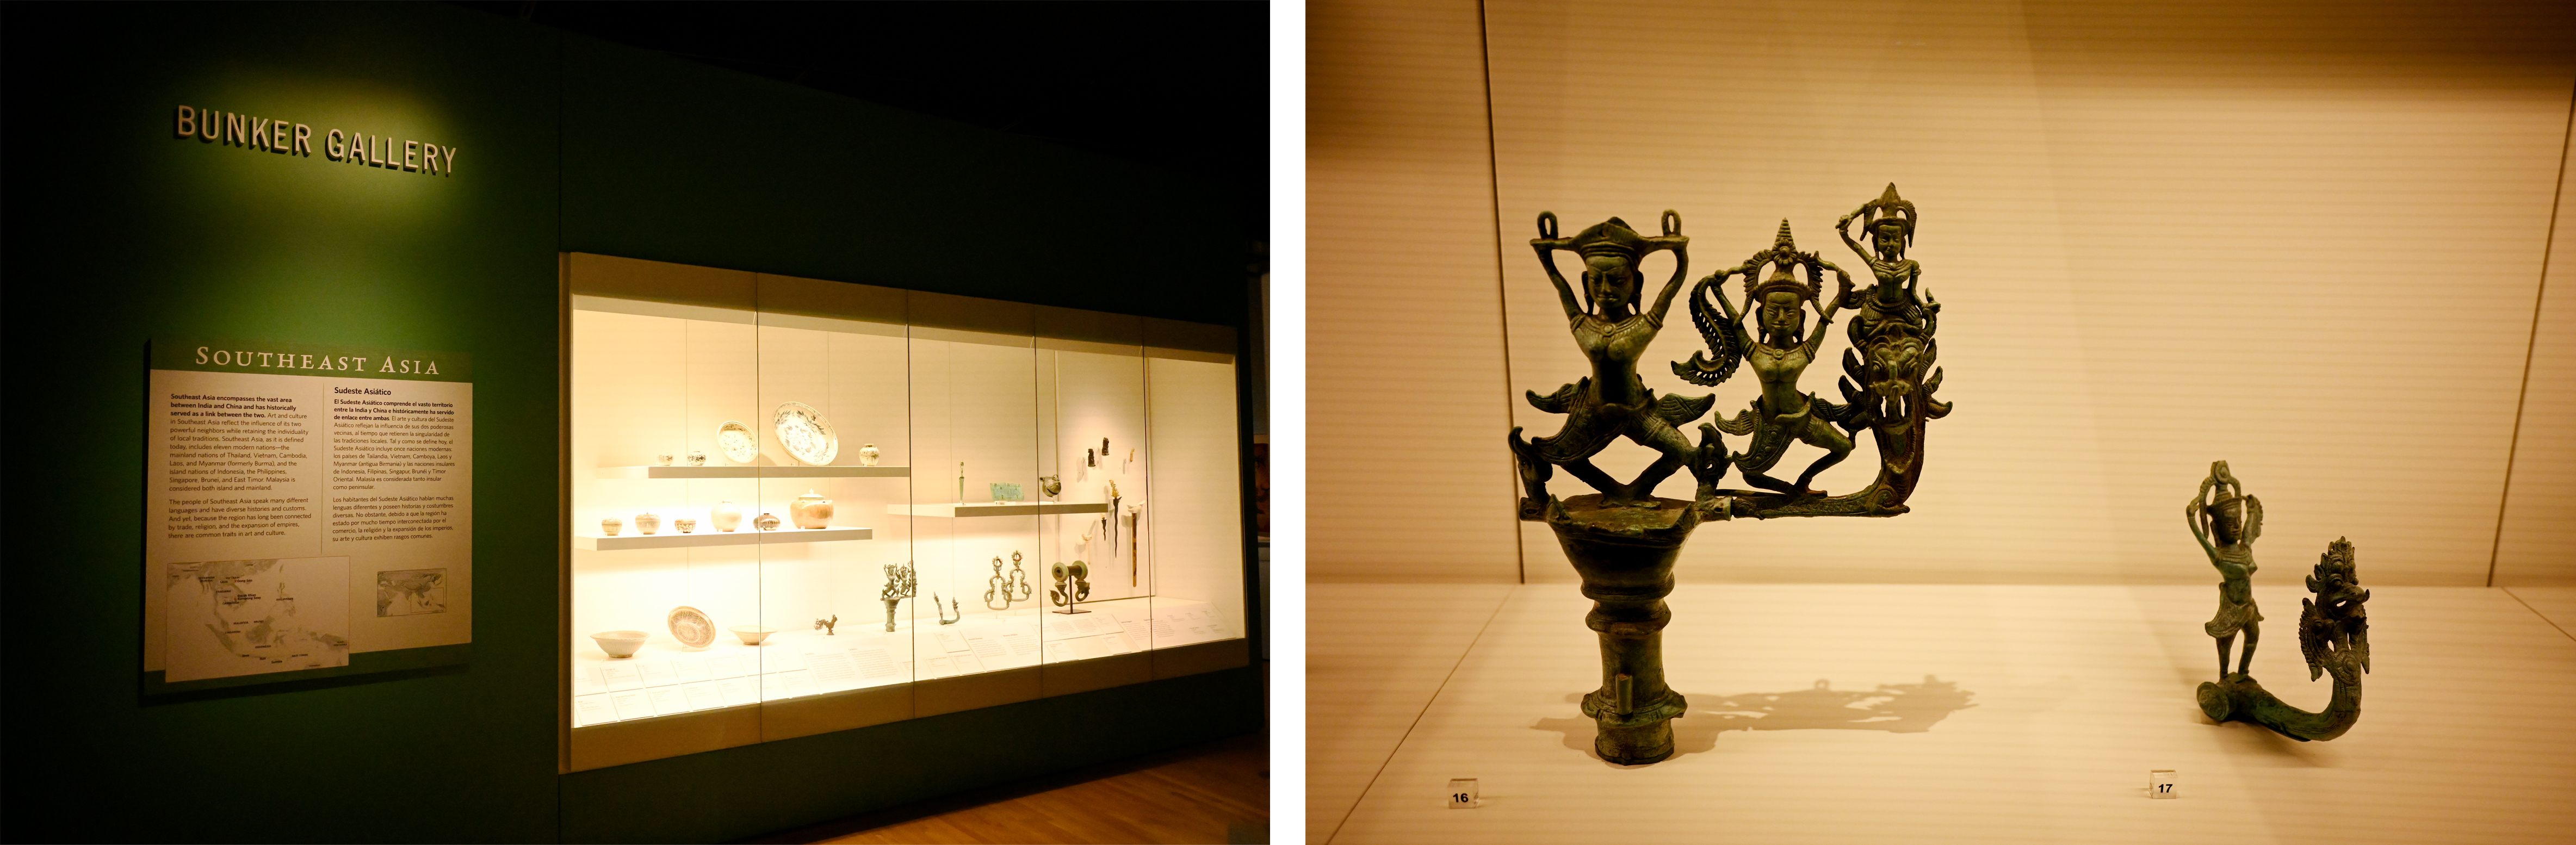 LEFT: The Bunker Gallery section of Denver Art Museum's Southeast Asian art gallery is pictured on Oct. 25, 2022. RIGHT: Inside the Bunker Gallery an ornament with deity figures from Cambodia, estimated to have been crafted in the 1100s out of Bronze, is labeled as a gift of Mrs. John Bunker. (Photos by Hyoung Chang/The Denver Post)